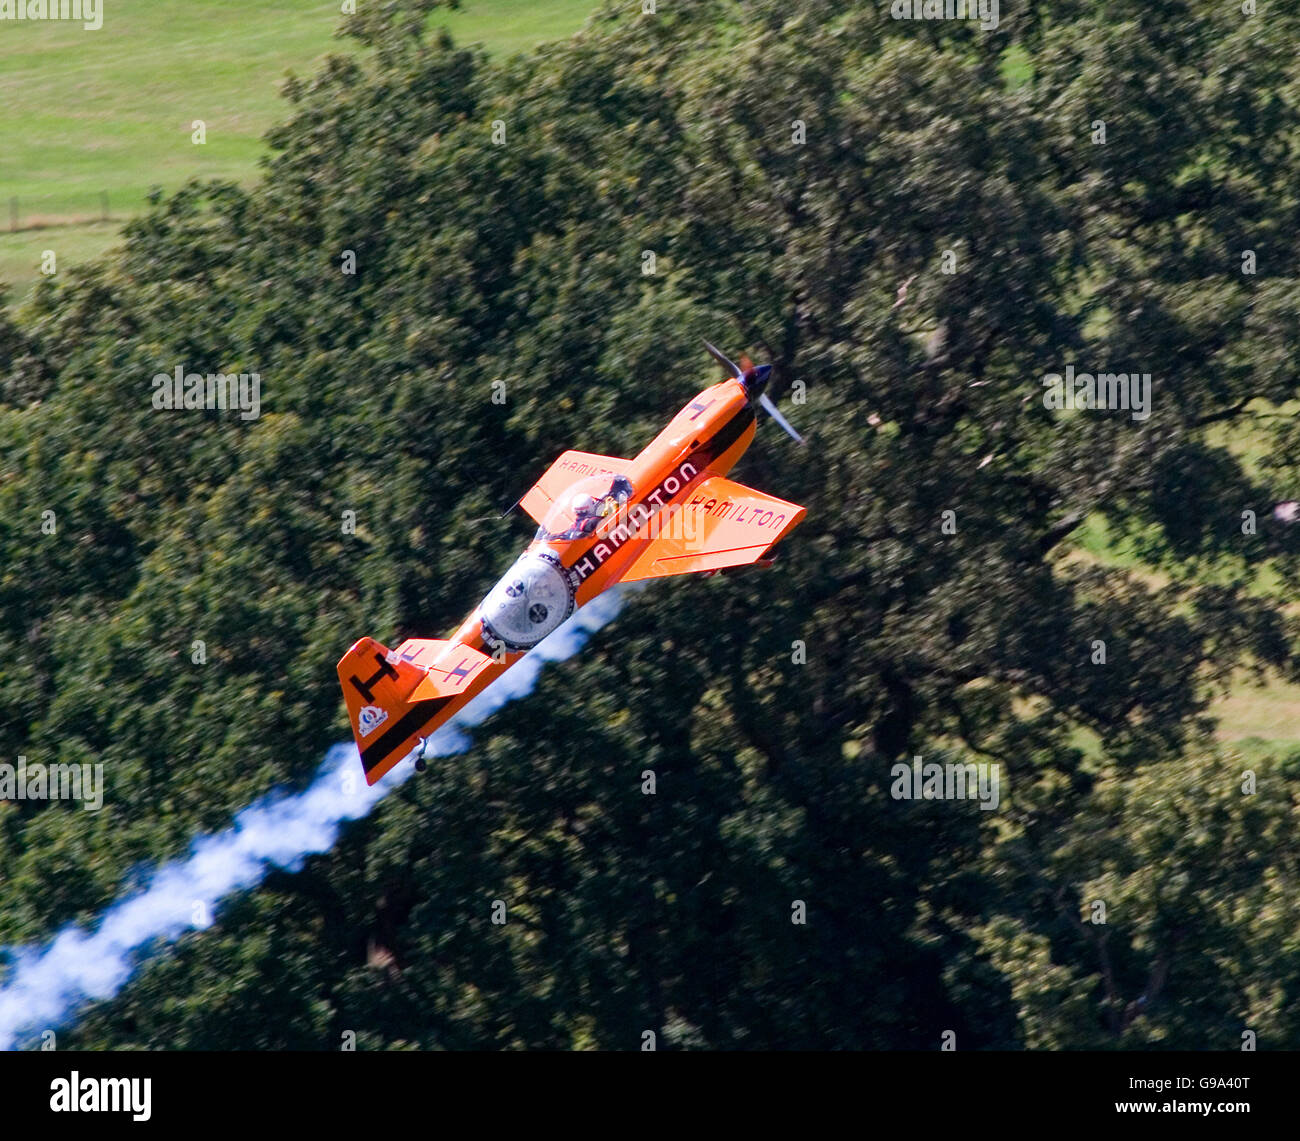 Aviation - Red Bull Air Race World Series - Longleat House. An aircraft in action flying around the pylons during the Red Bull Air Race World Series at Longleat. Stock Photo